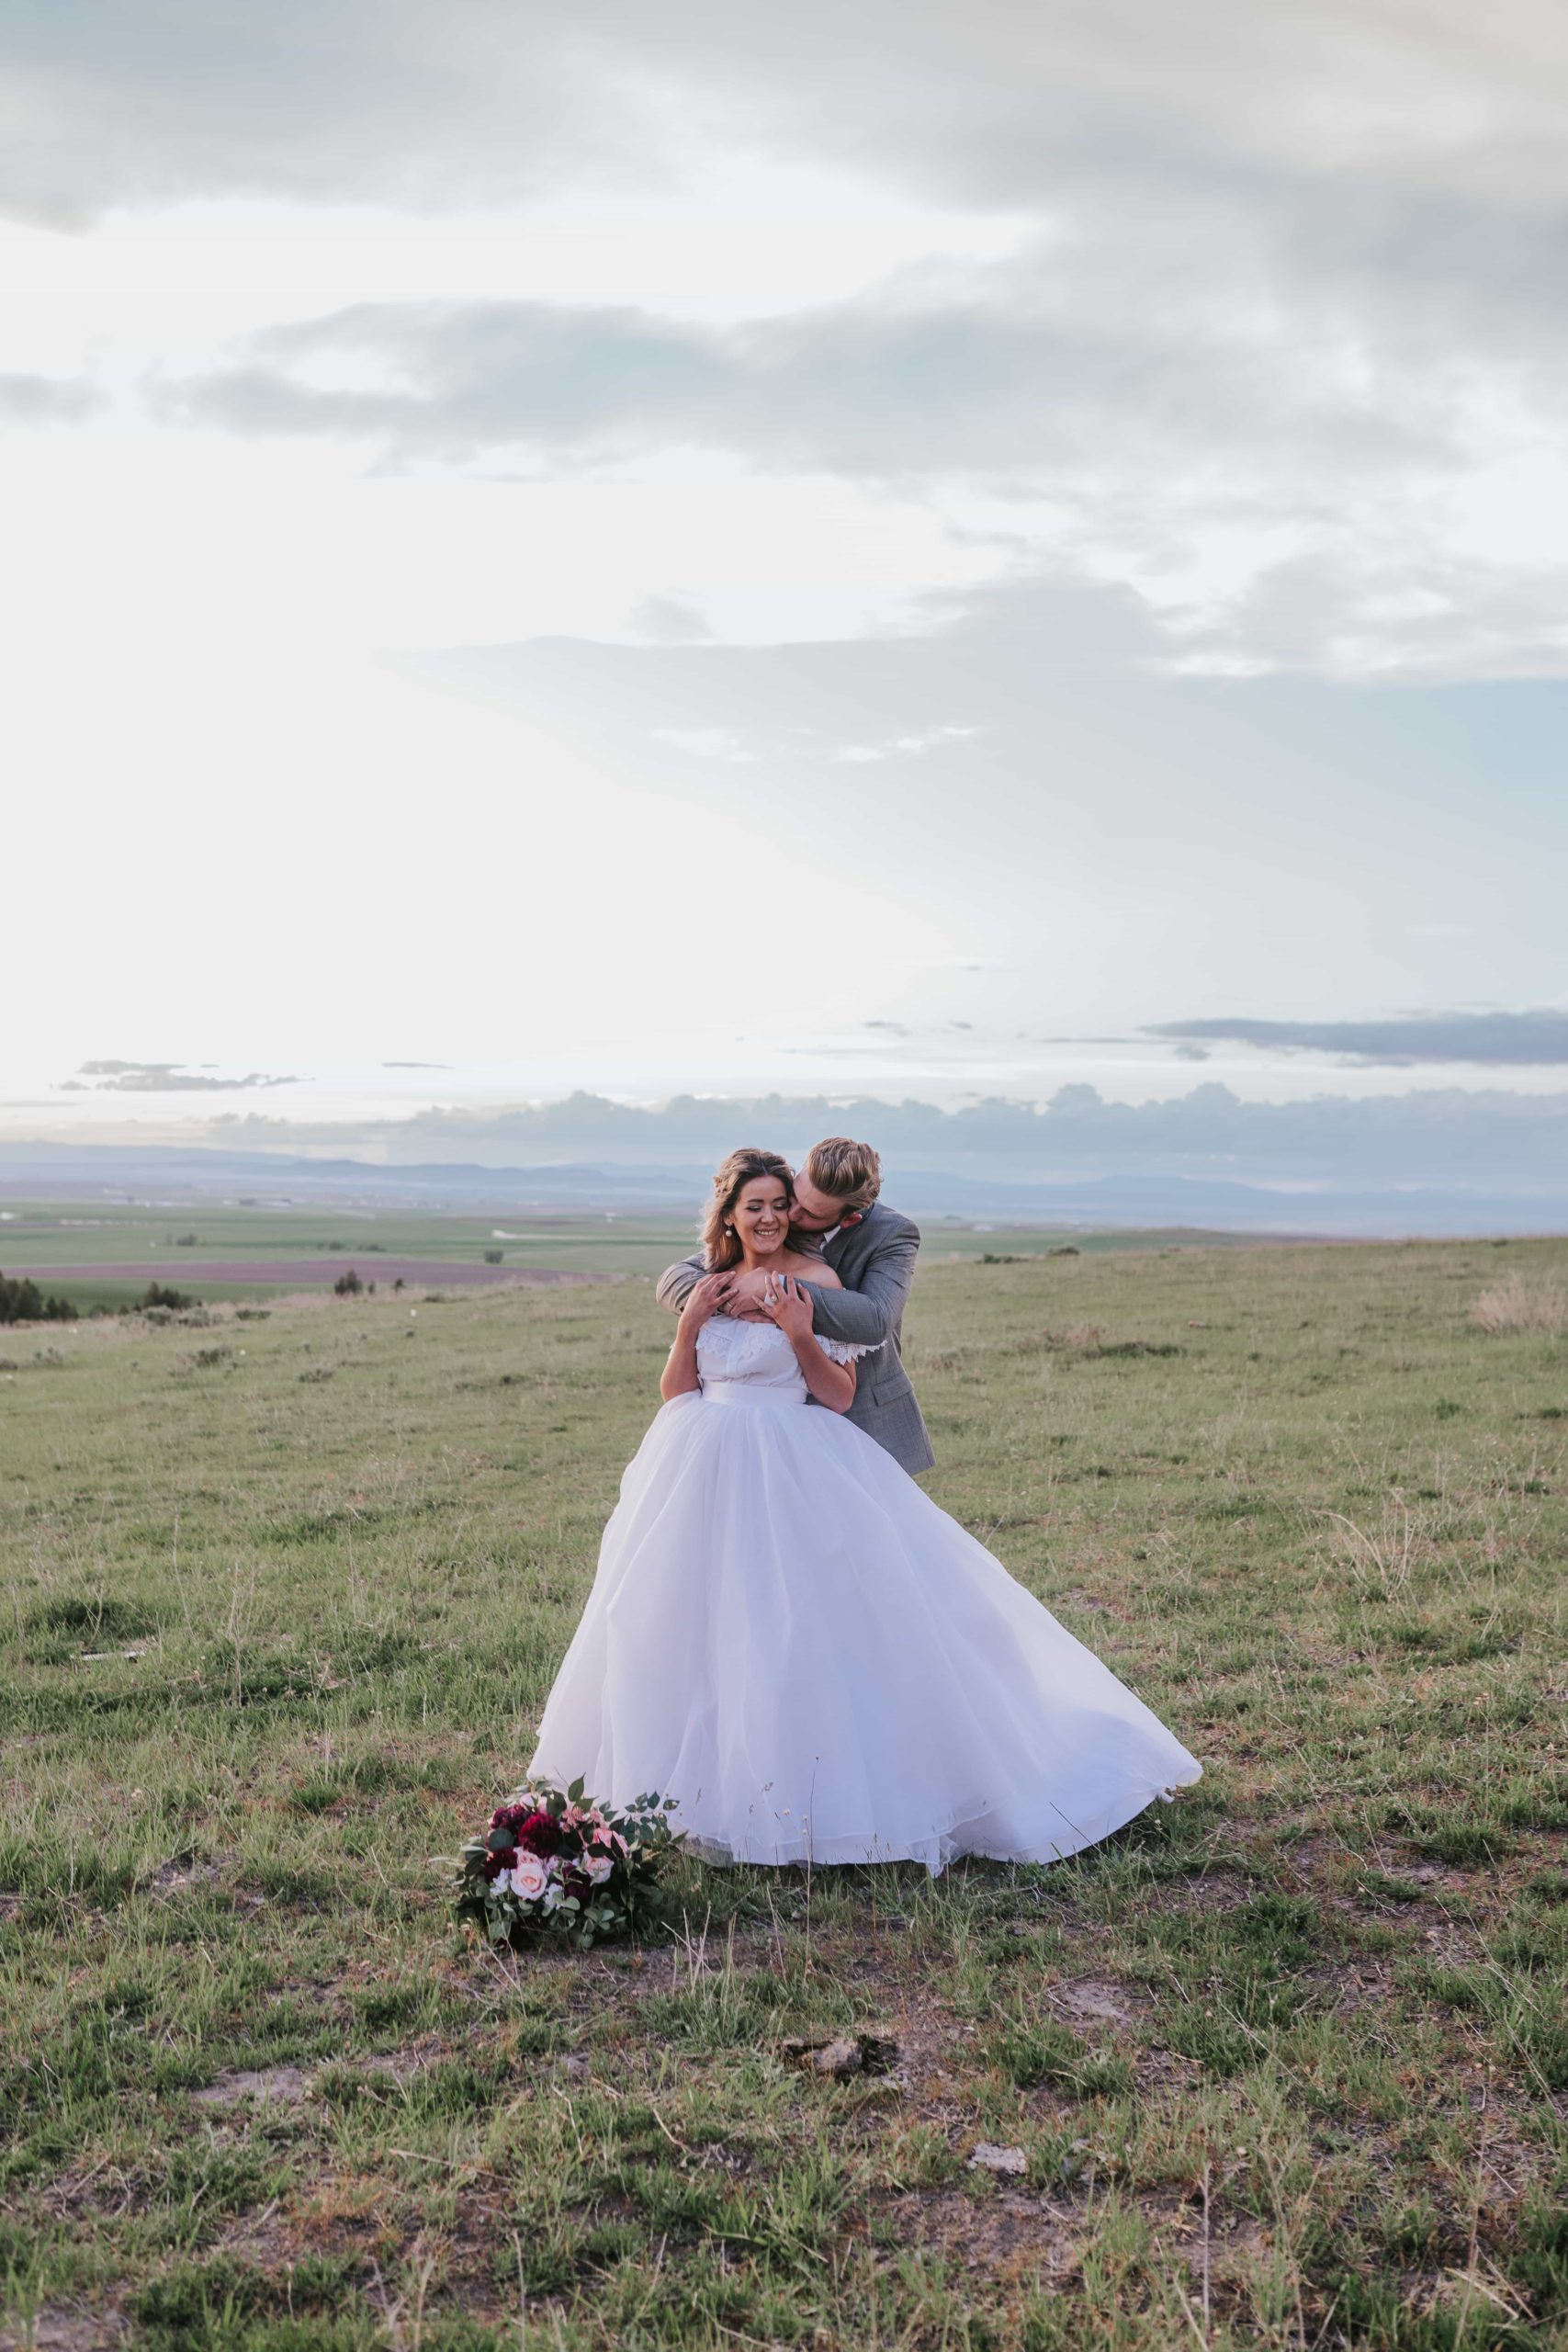 Bride and Groom holding each other in a field on top of a mountain